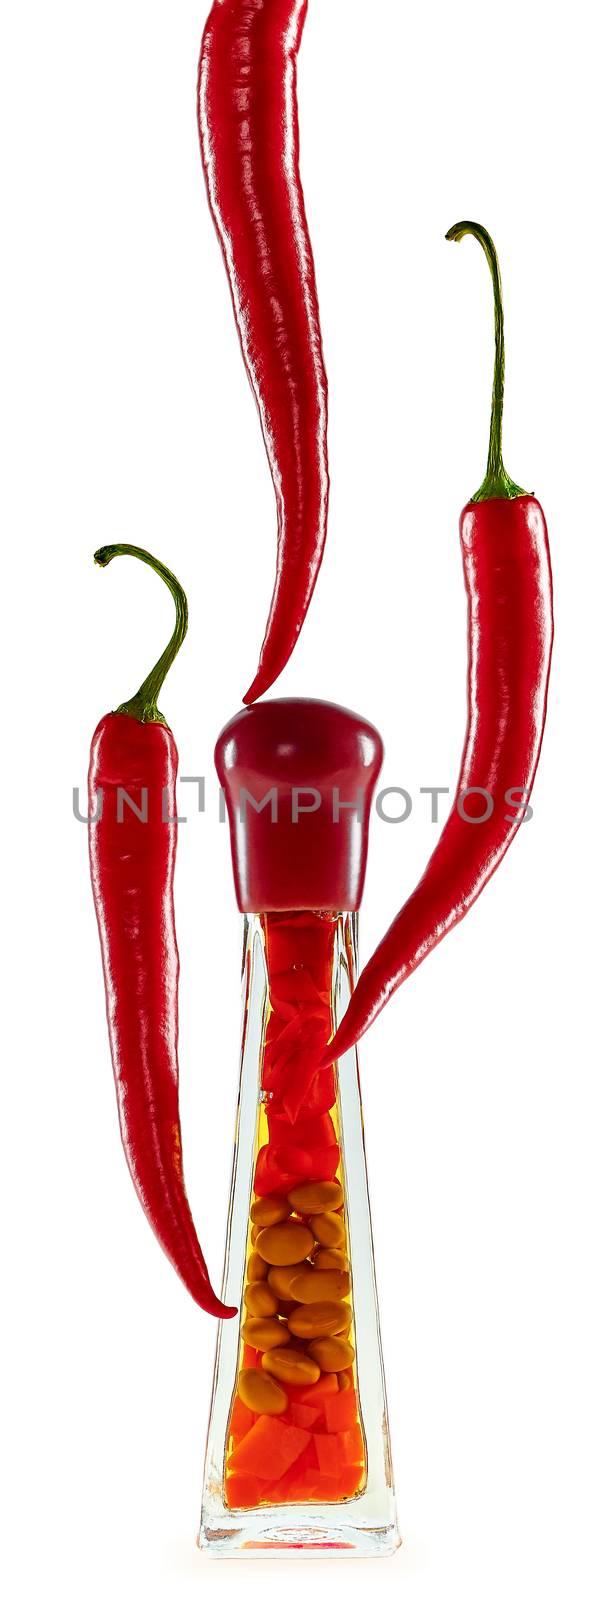 Red hot pepper in pods around bottle,vegetables.  by 918